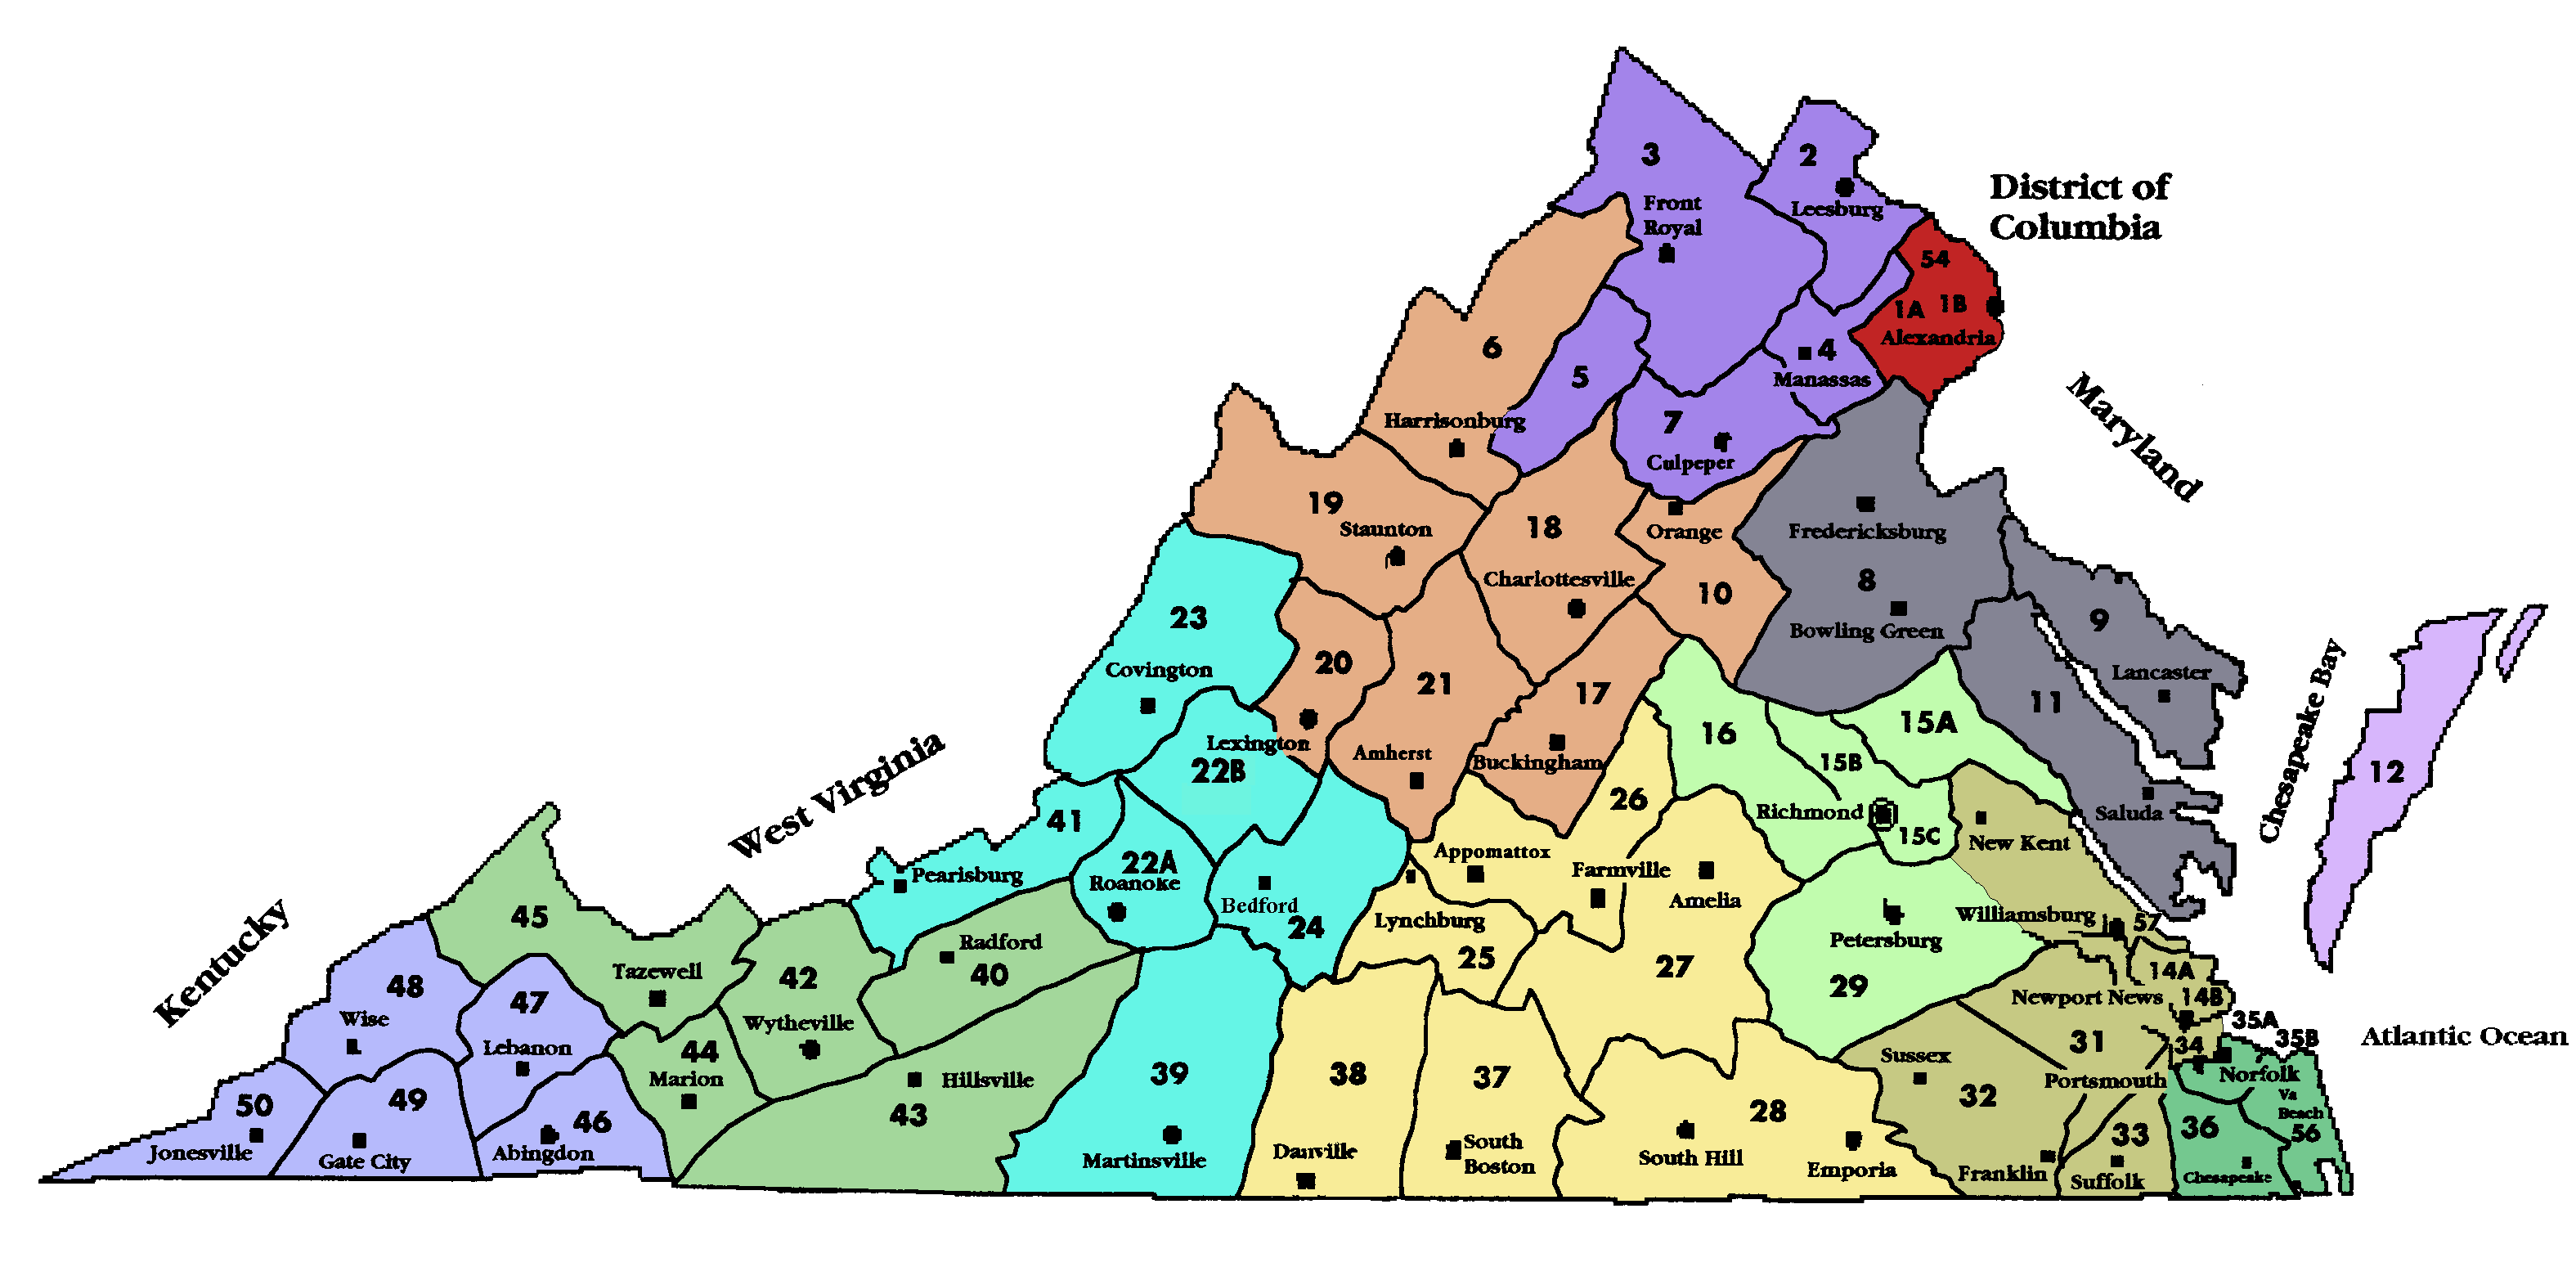 This is an image of Virginia and all of the districts.